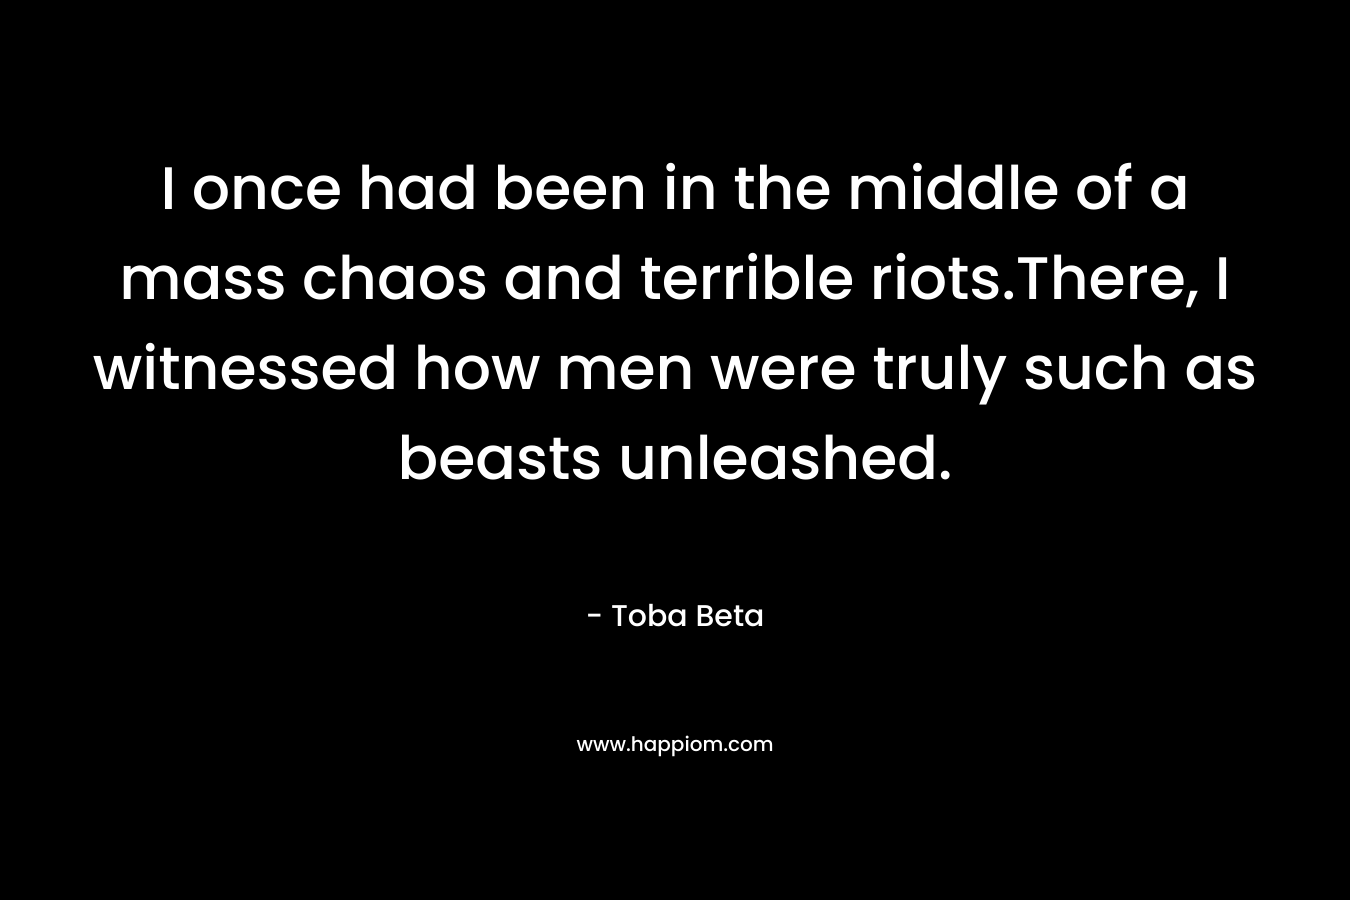 I once had been in the middle of a mass chaos and terrible riots.There, I witnessed how men were truly such as beasts unleashed.